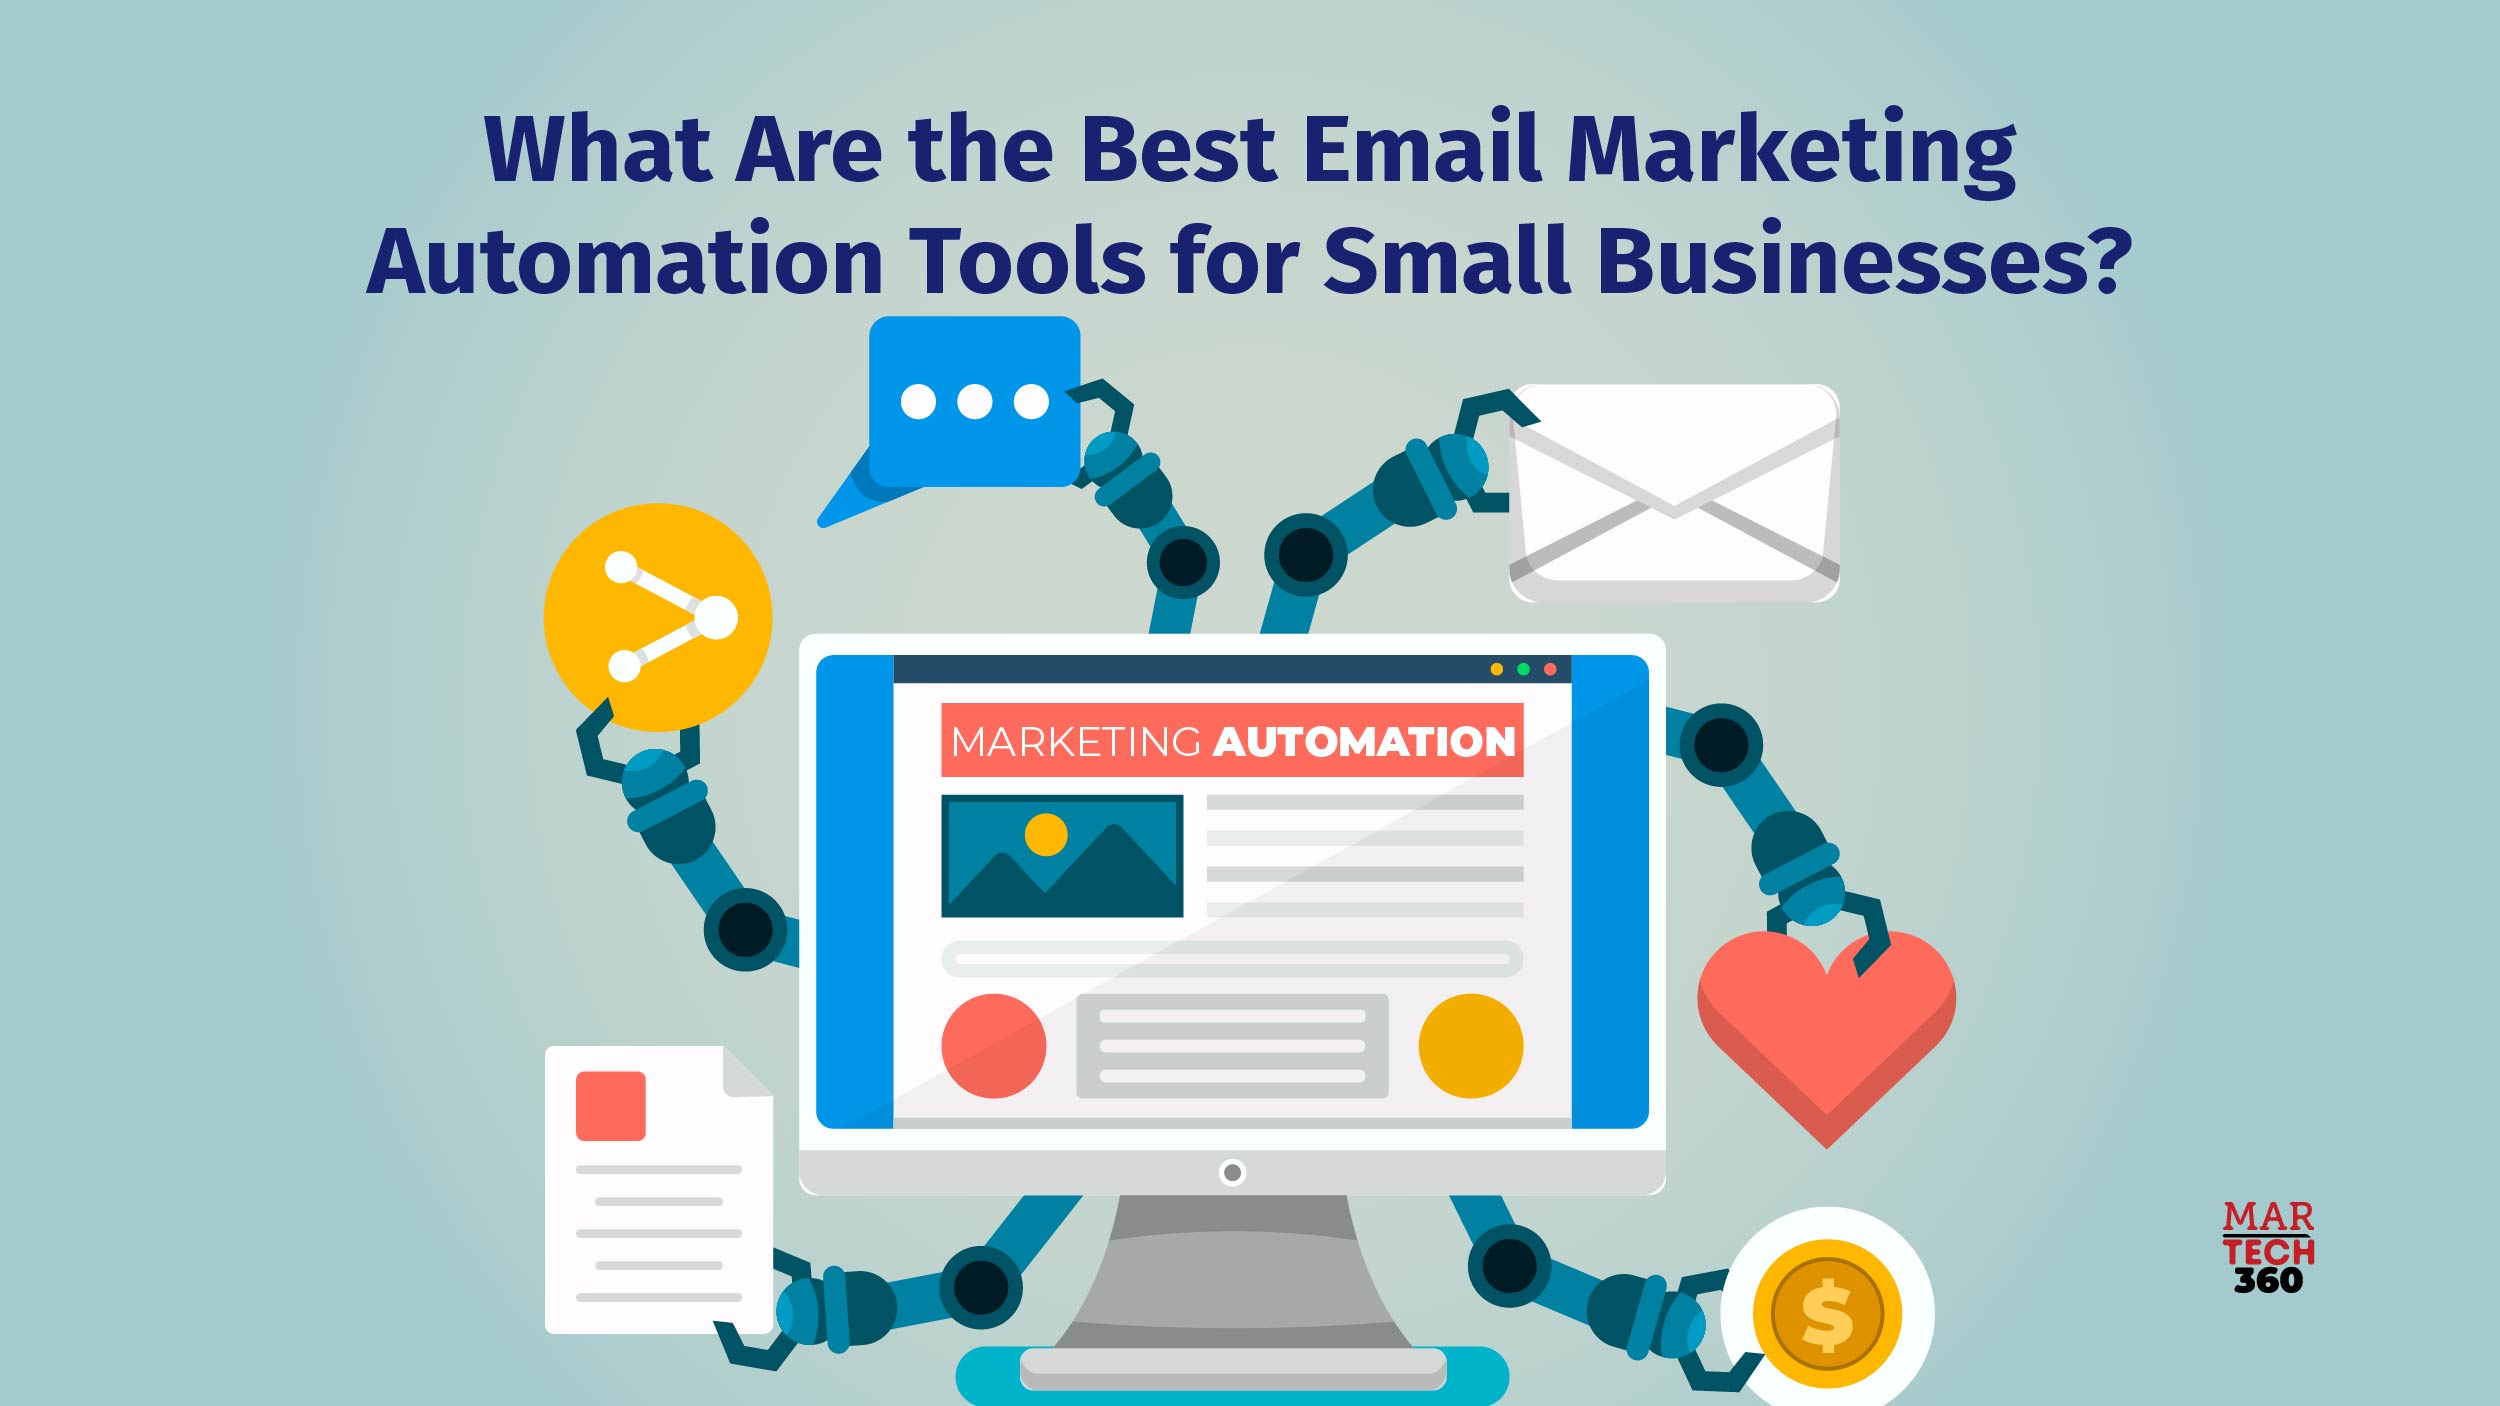 What Are the Best Email Marketing Automation Tools for Small Businesses?